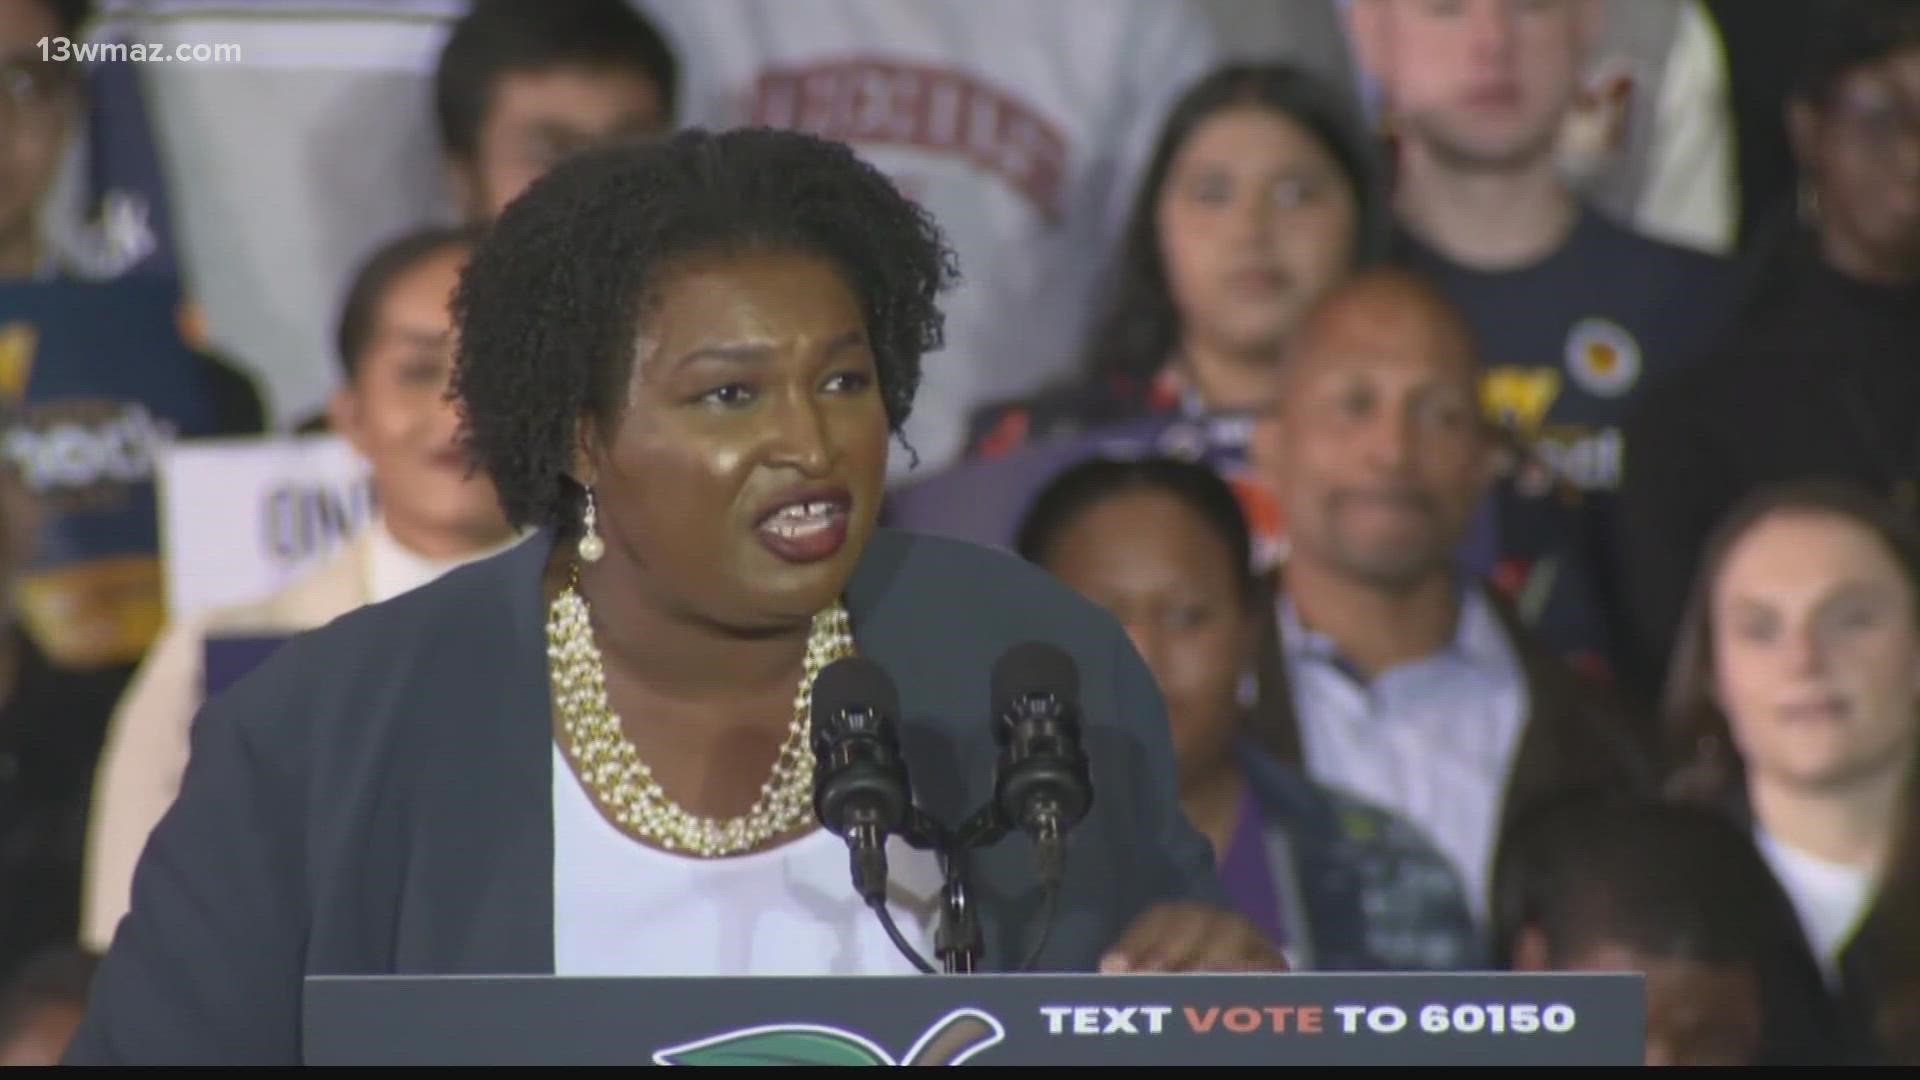 Abrams raised more than $100 million in her loss to Brian Kemp. A former staffer said they got their last check on Nov. 15.